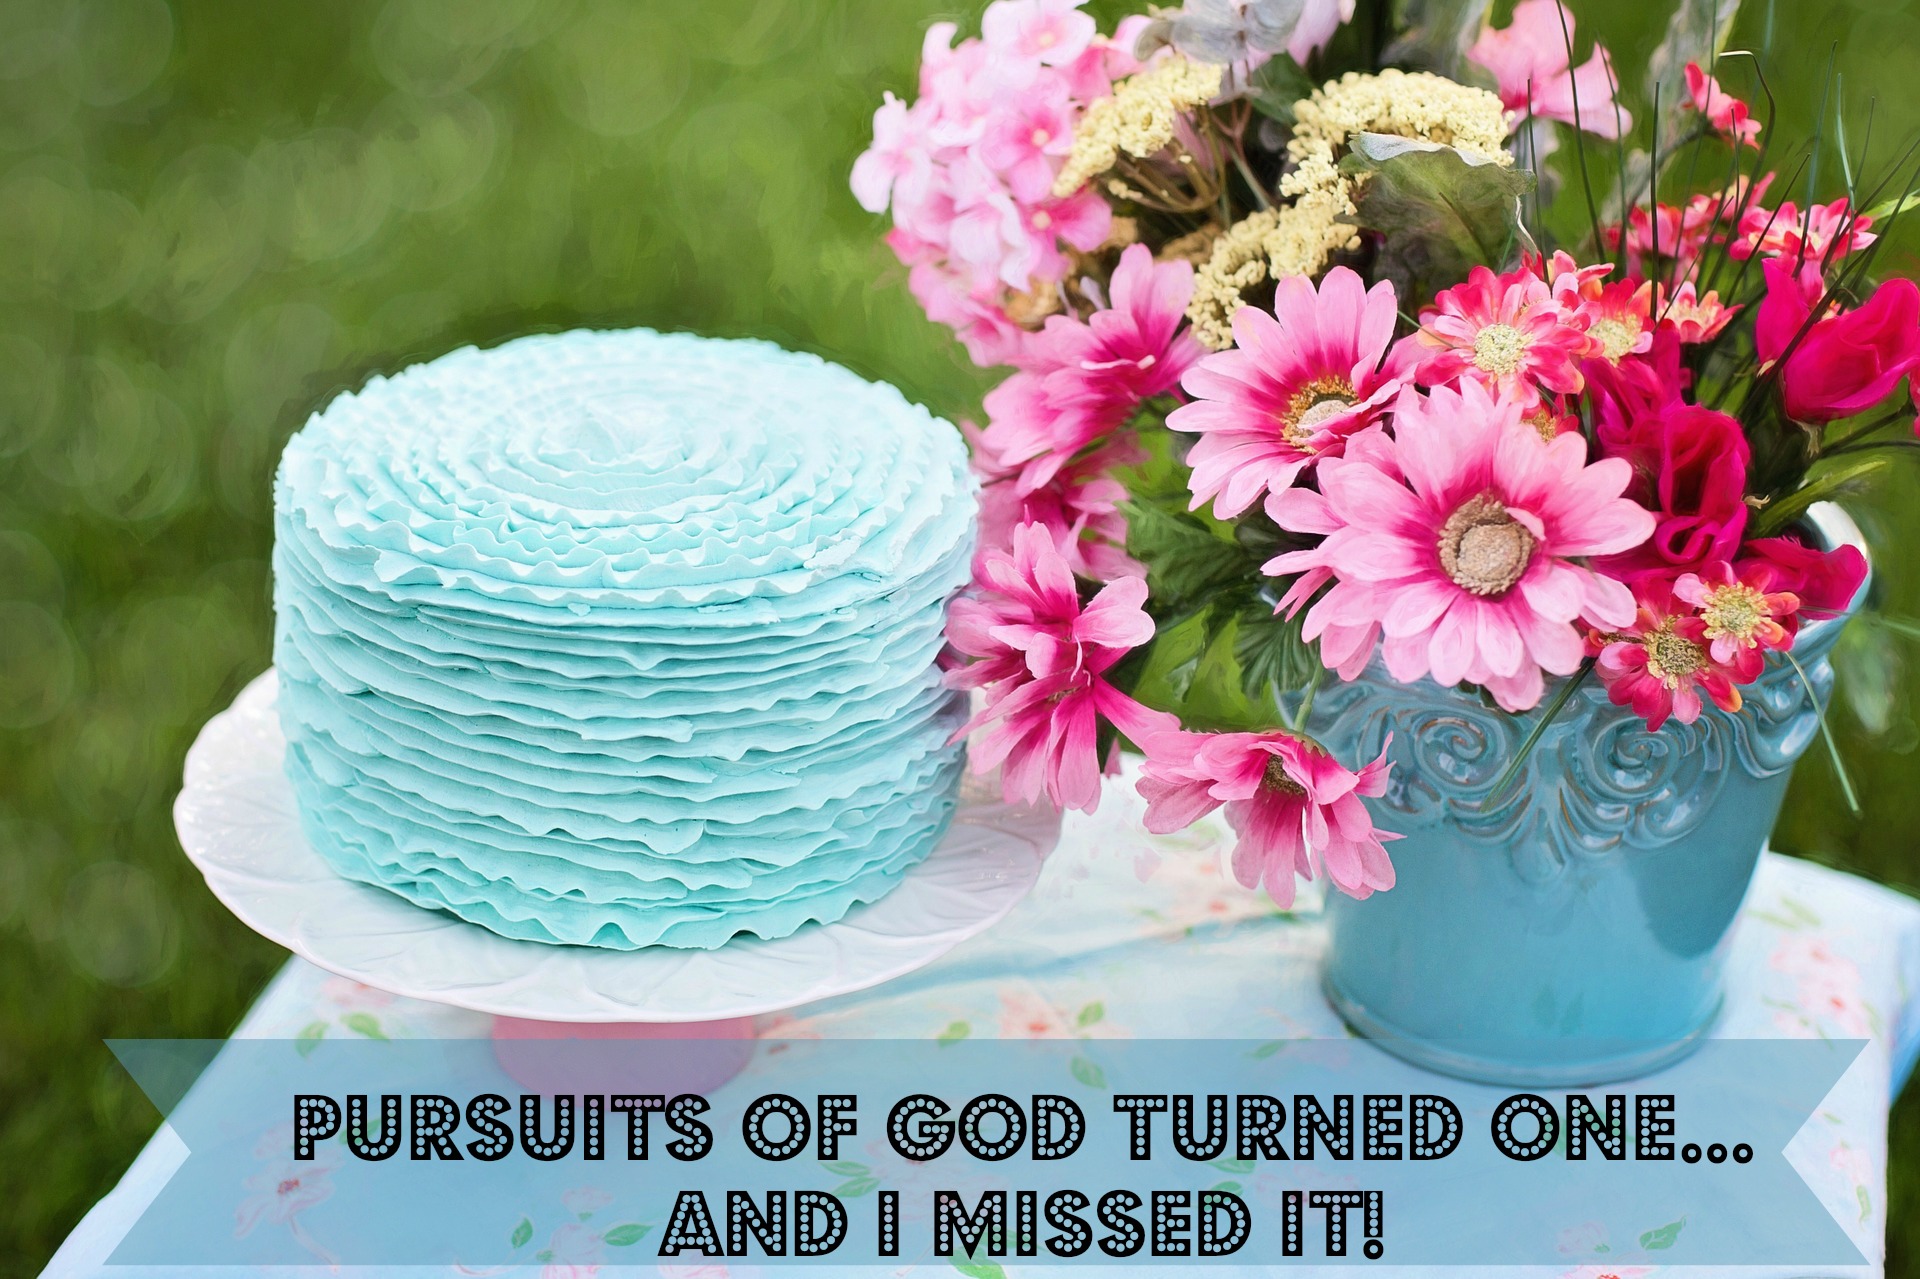 Pursuits of God Turned One… And I Missed It